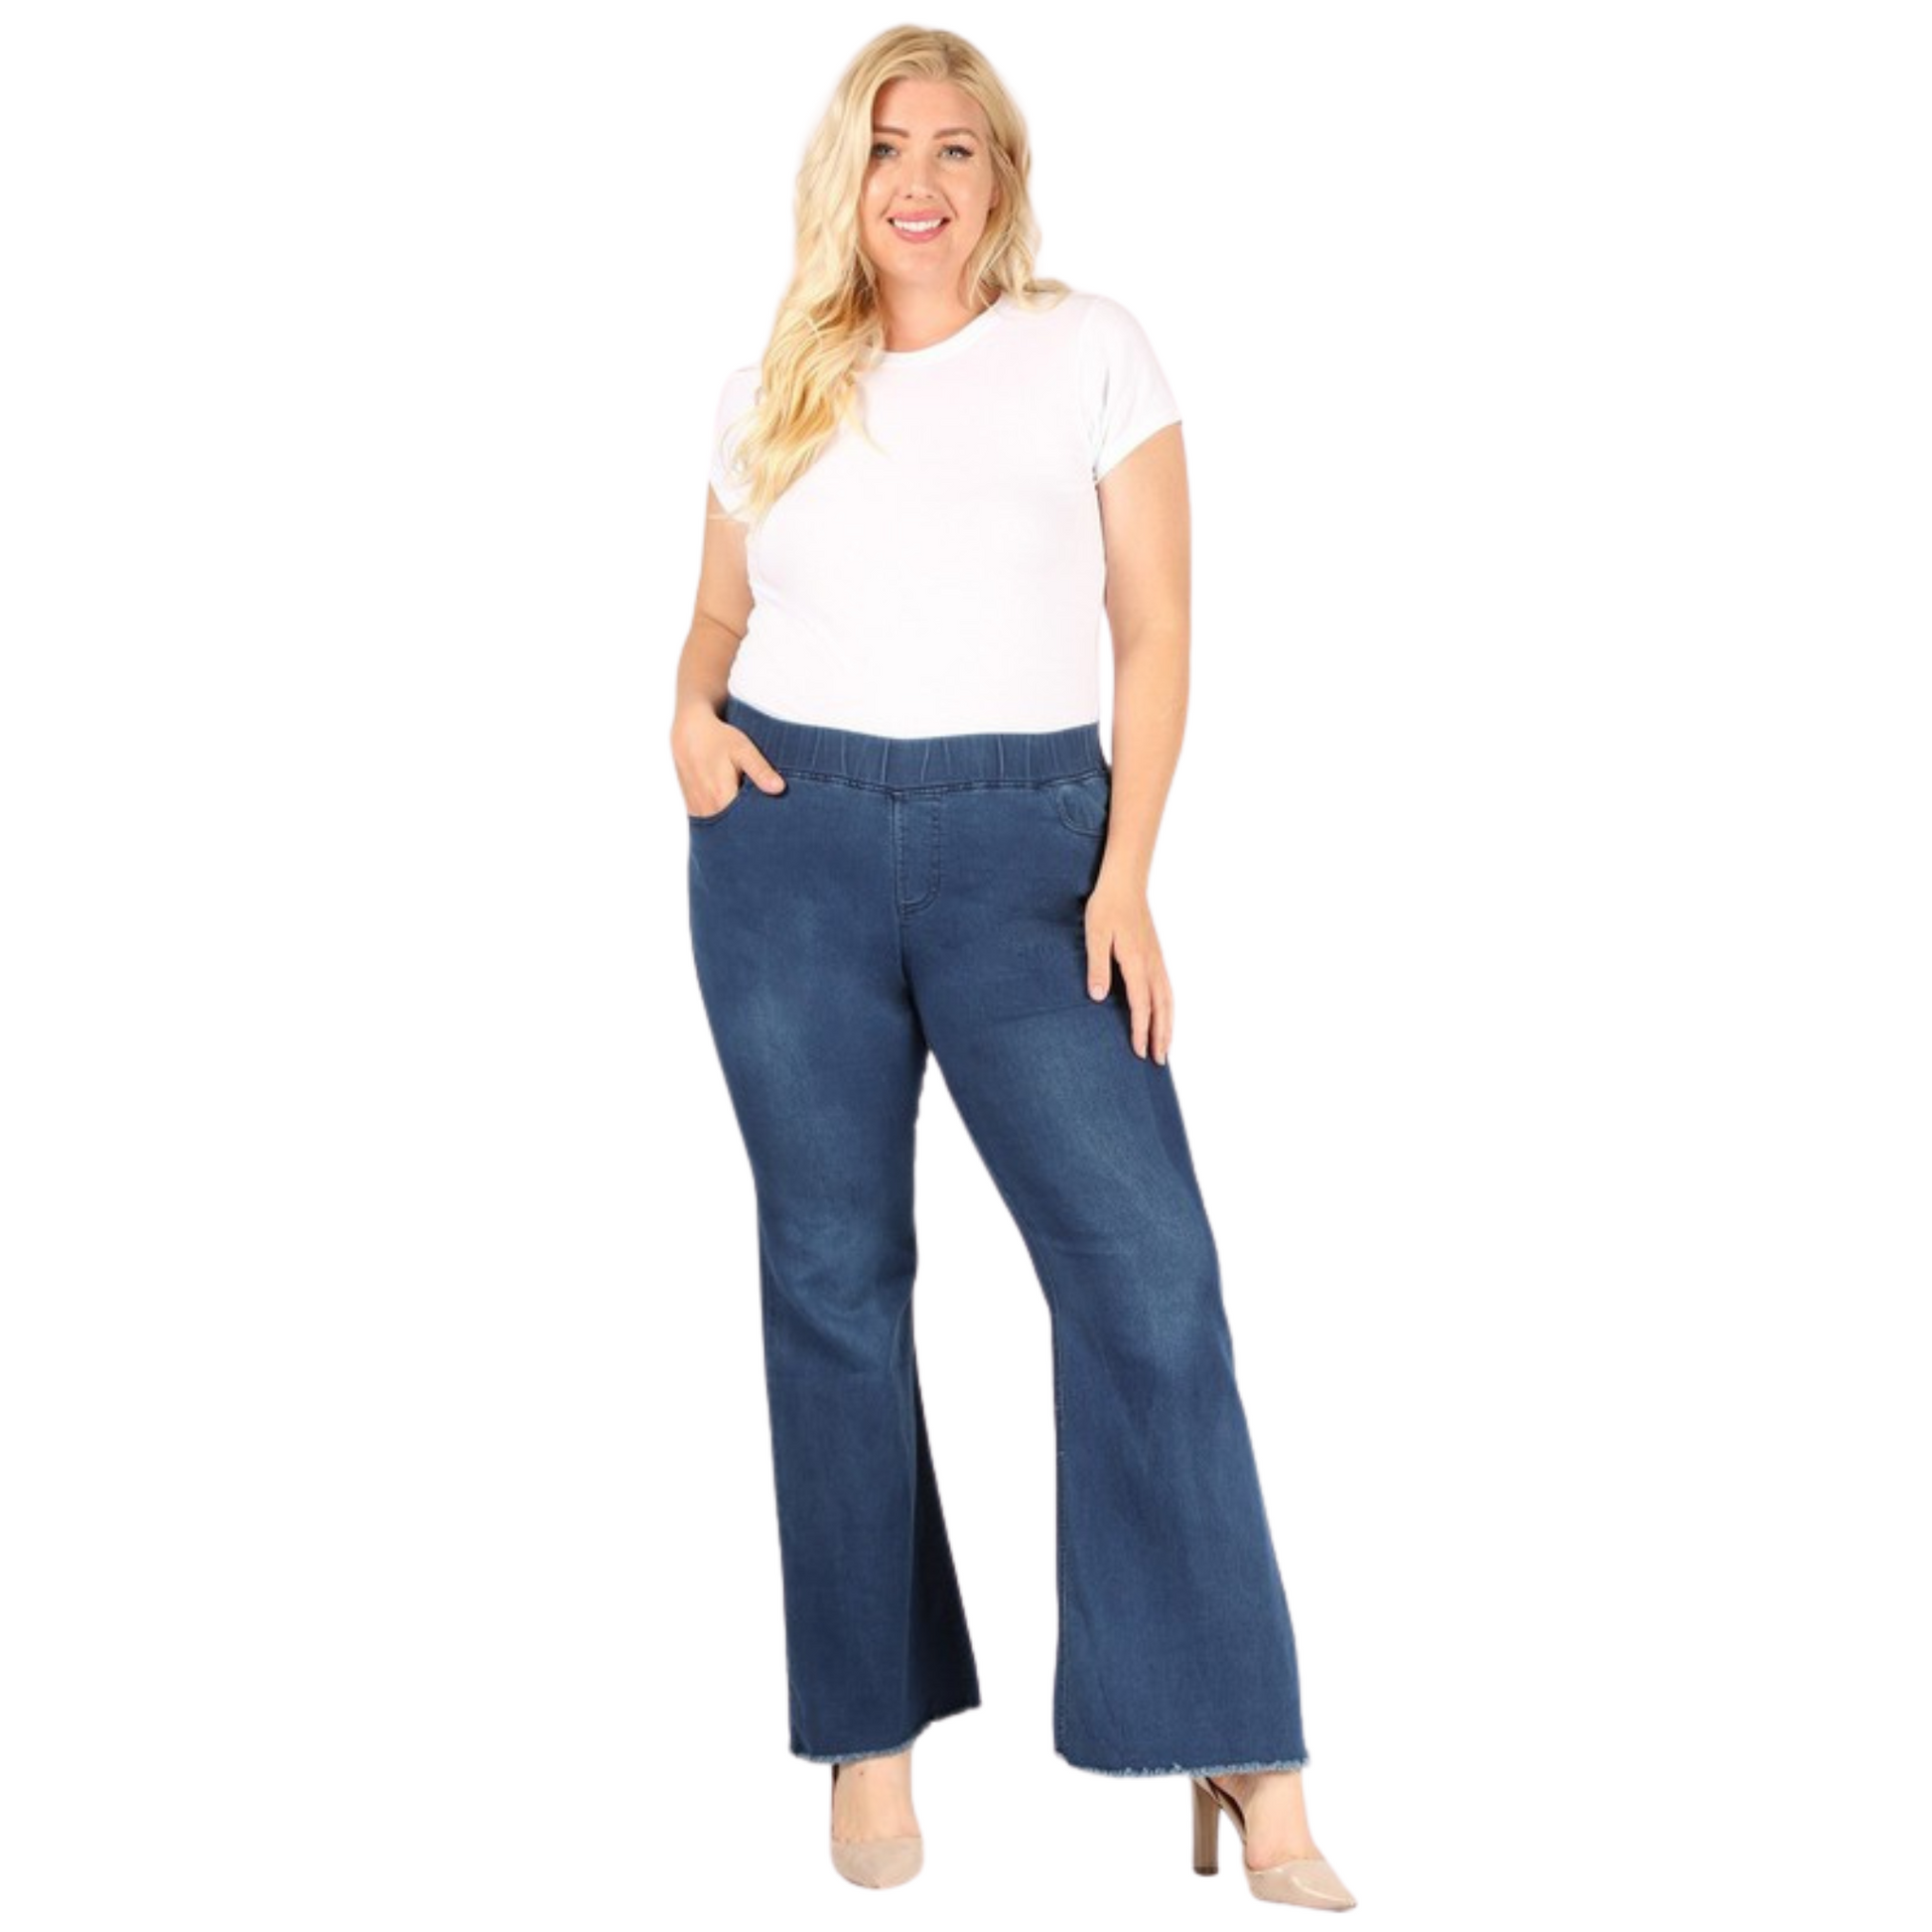 Stay comfortable and stylish with our High Waisted Flare Jeggings. Available in plus sizes, the dark wash and comfortable fit make these jeggings perfect for a variety of looks. Crafted with your comfort in mind, you'll love wearing these all day.